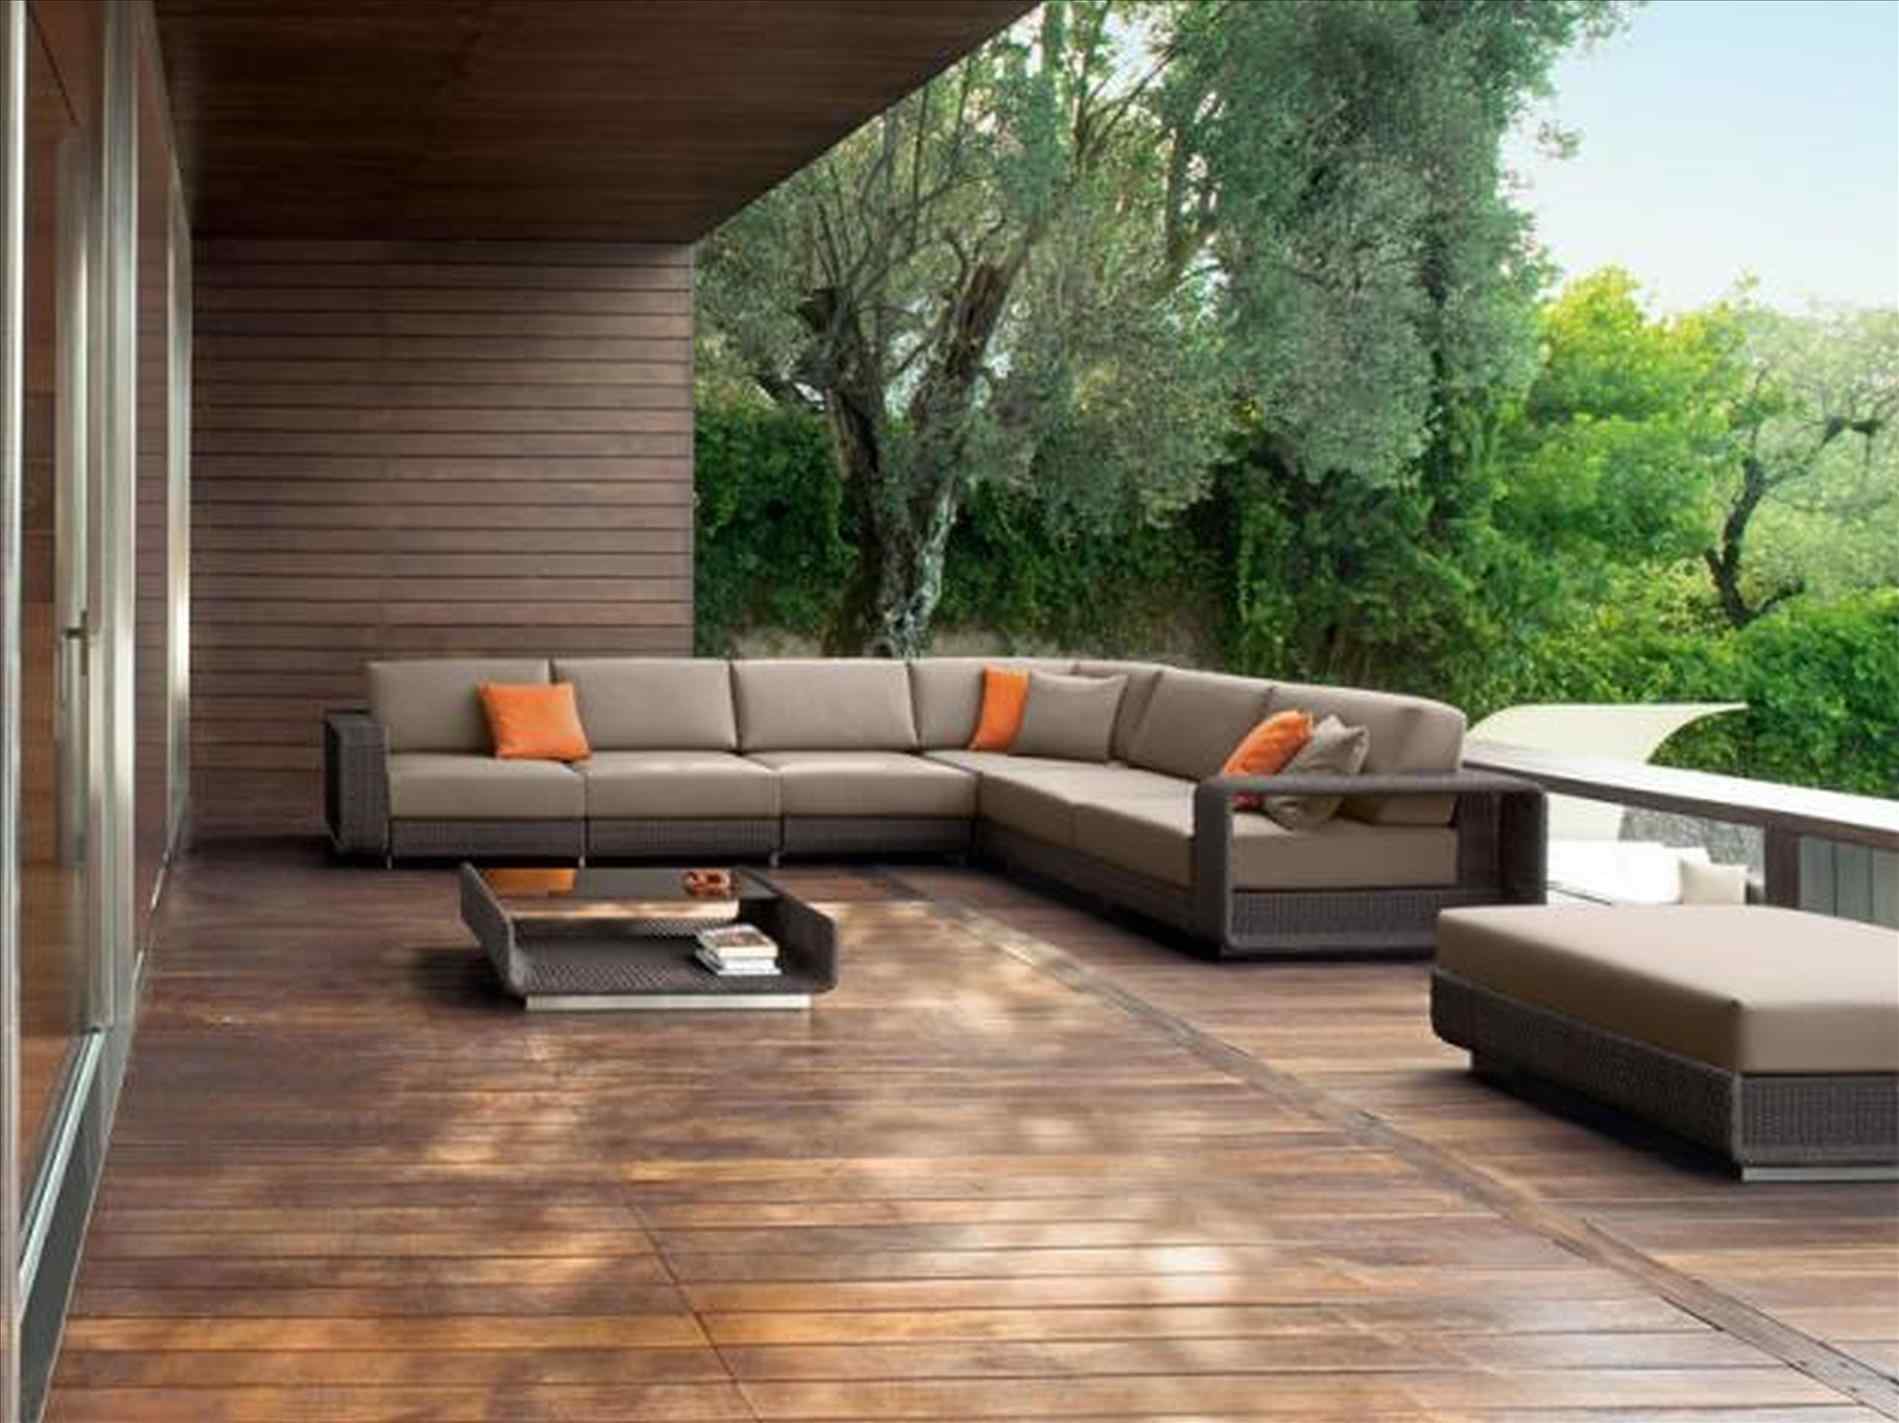 Outdoor Ideas:Modern Garden Furniture Sets Home Design Ideas Also Outdoor  Exciting Picture Patio The